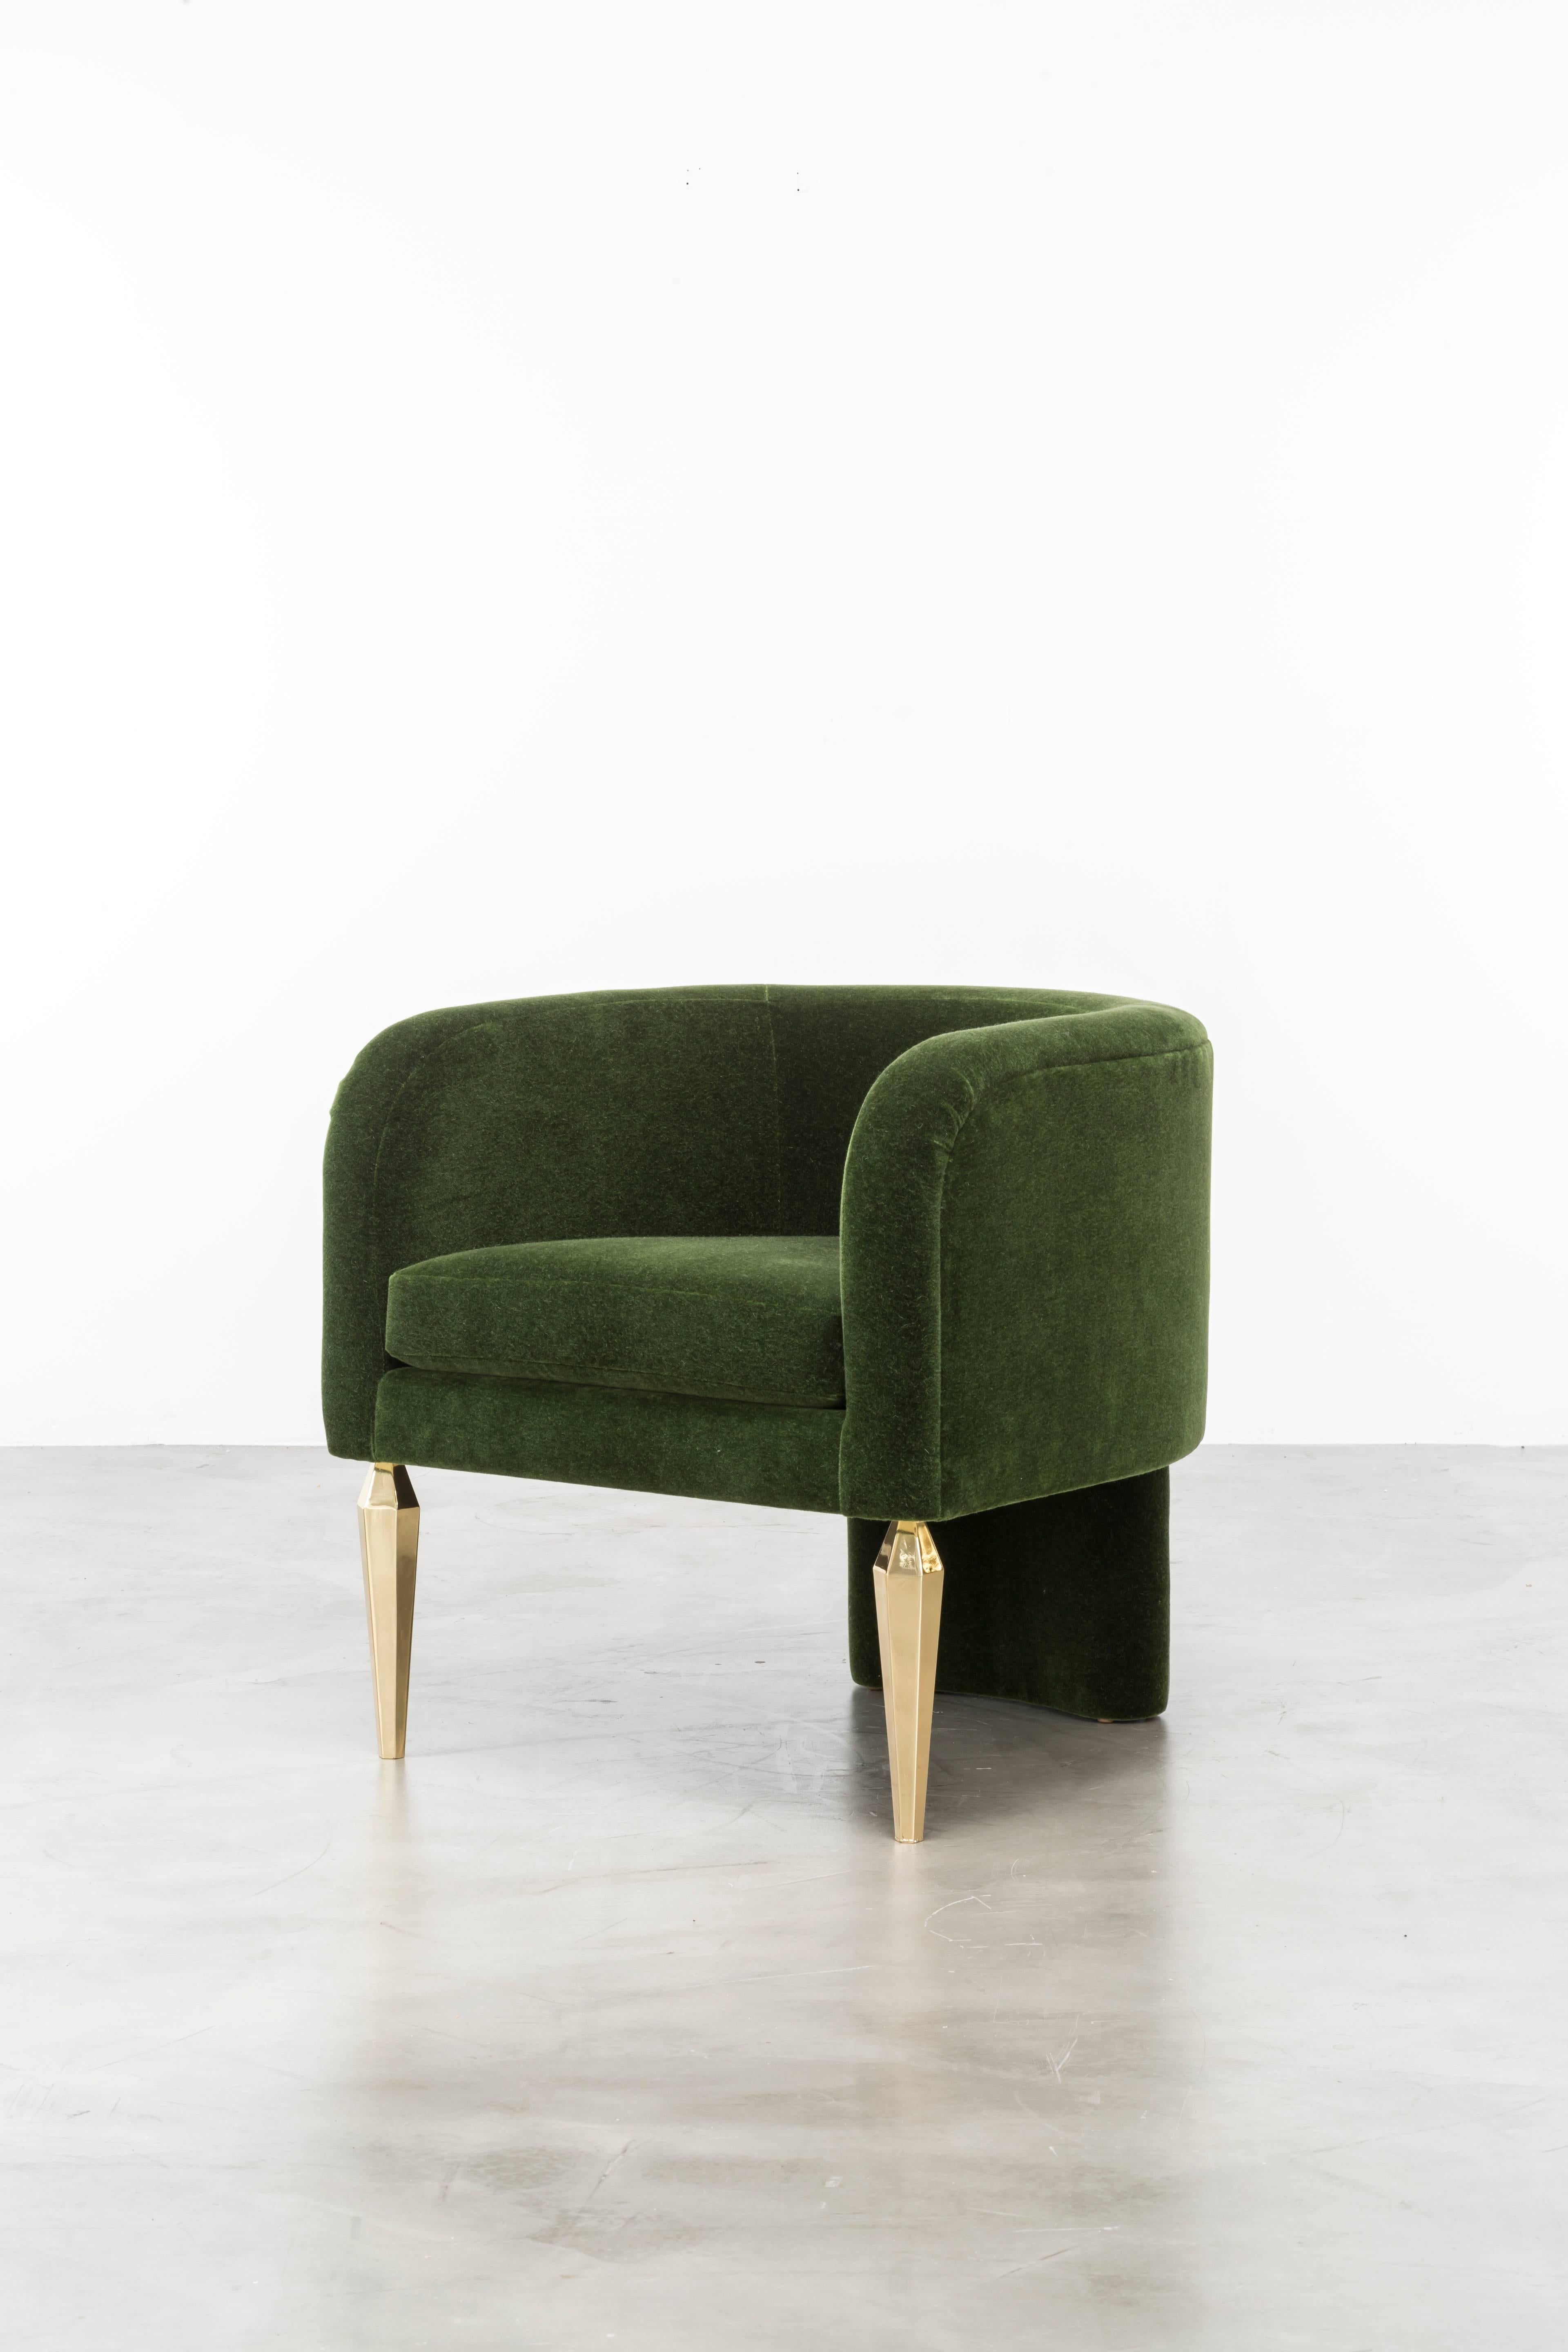 POMPE CHAIR - Modern Mohair Chair with Stiletto Legs and a Waterfall Back

The Pompe Chair is a modern and stylish piece of furniture designed to make a bold statement in any room. Its design is inspired by the glamorous stilettos of the 1970s, and